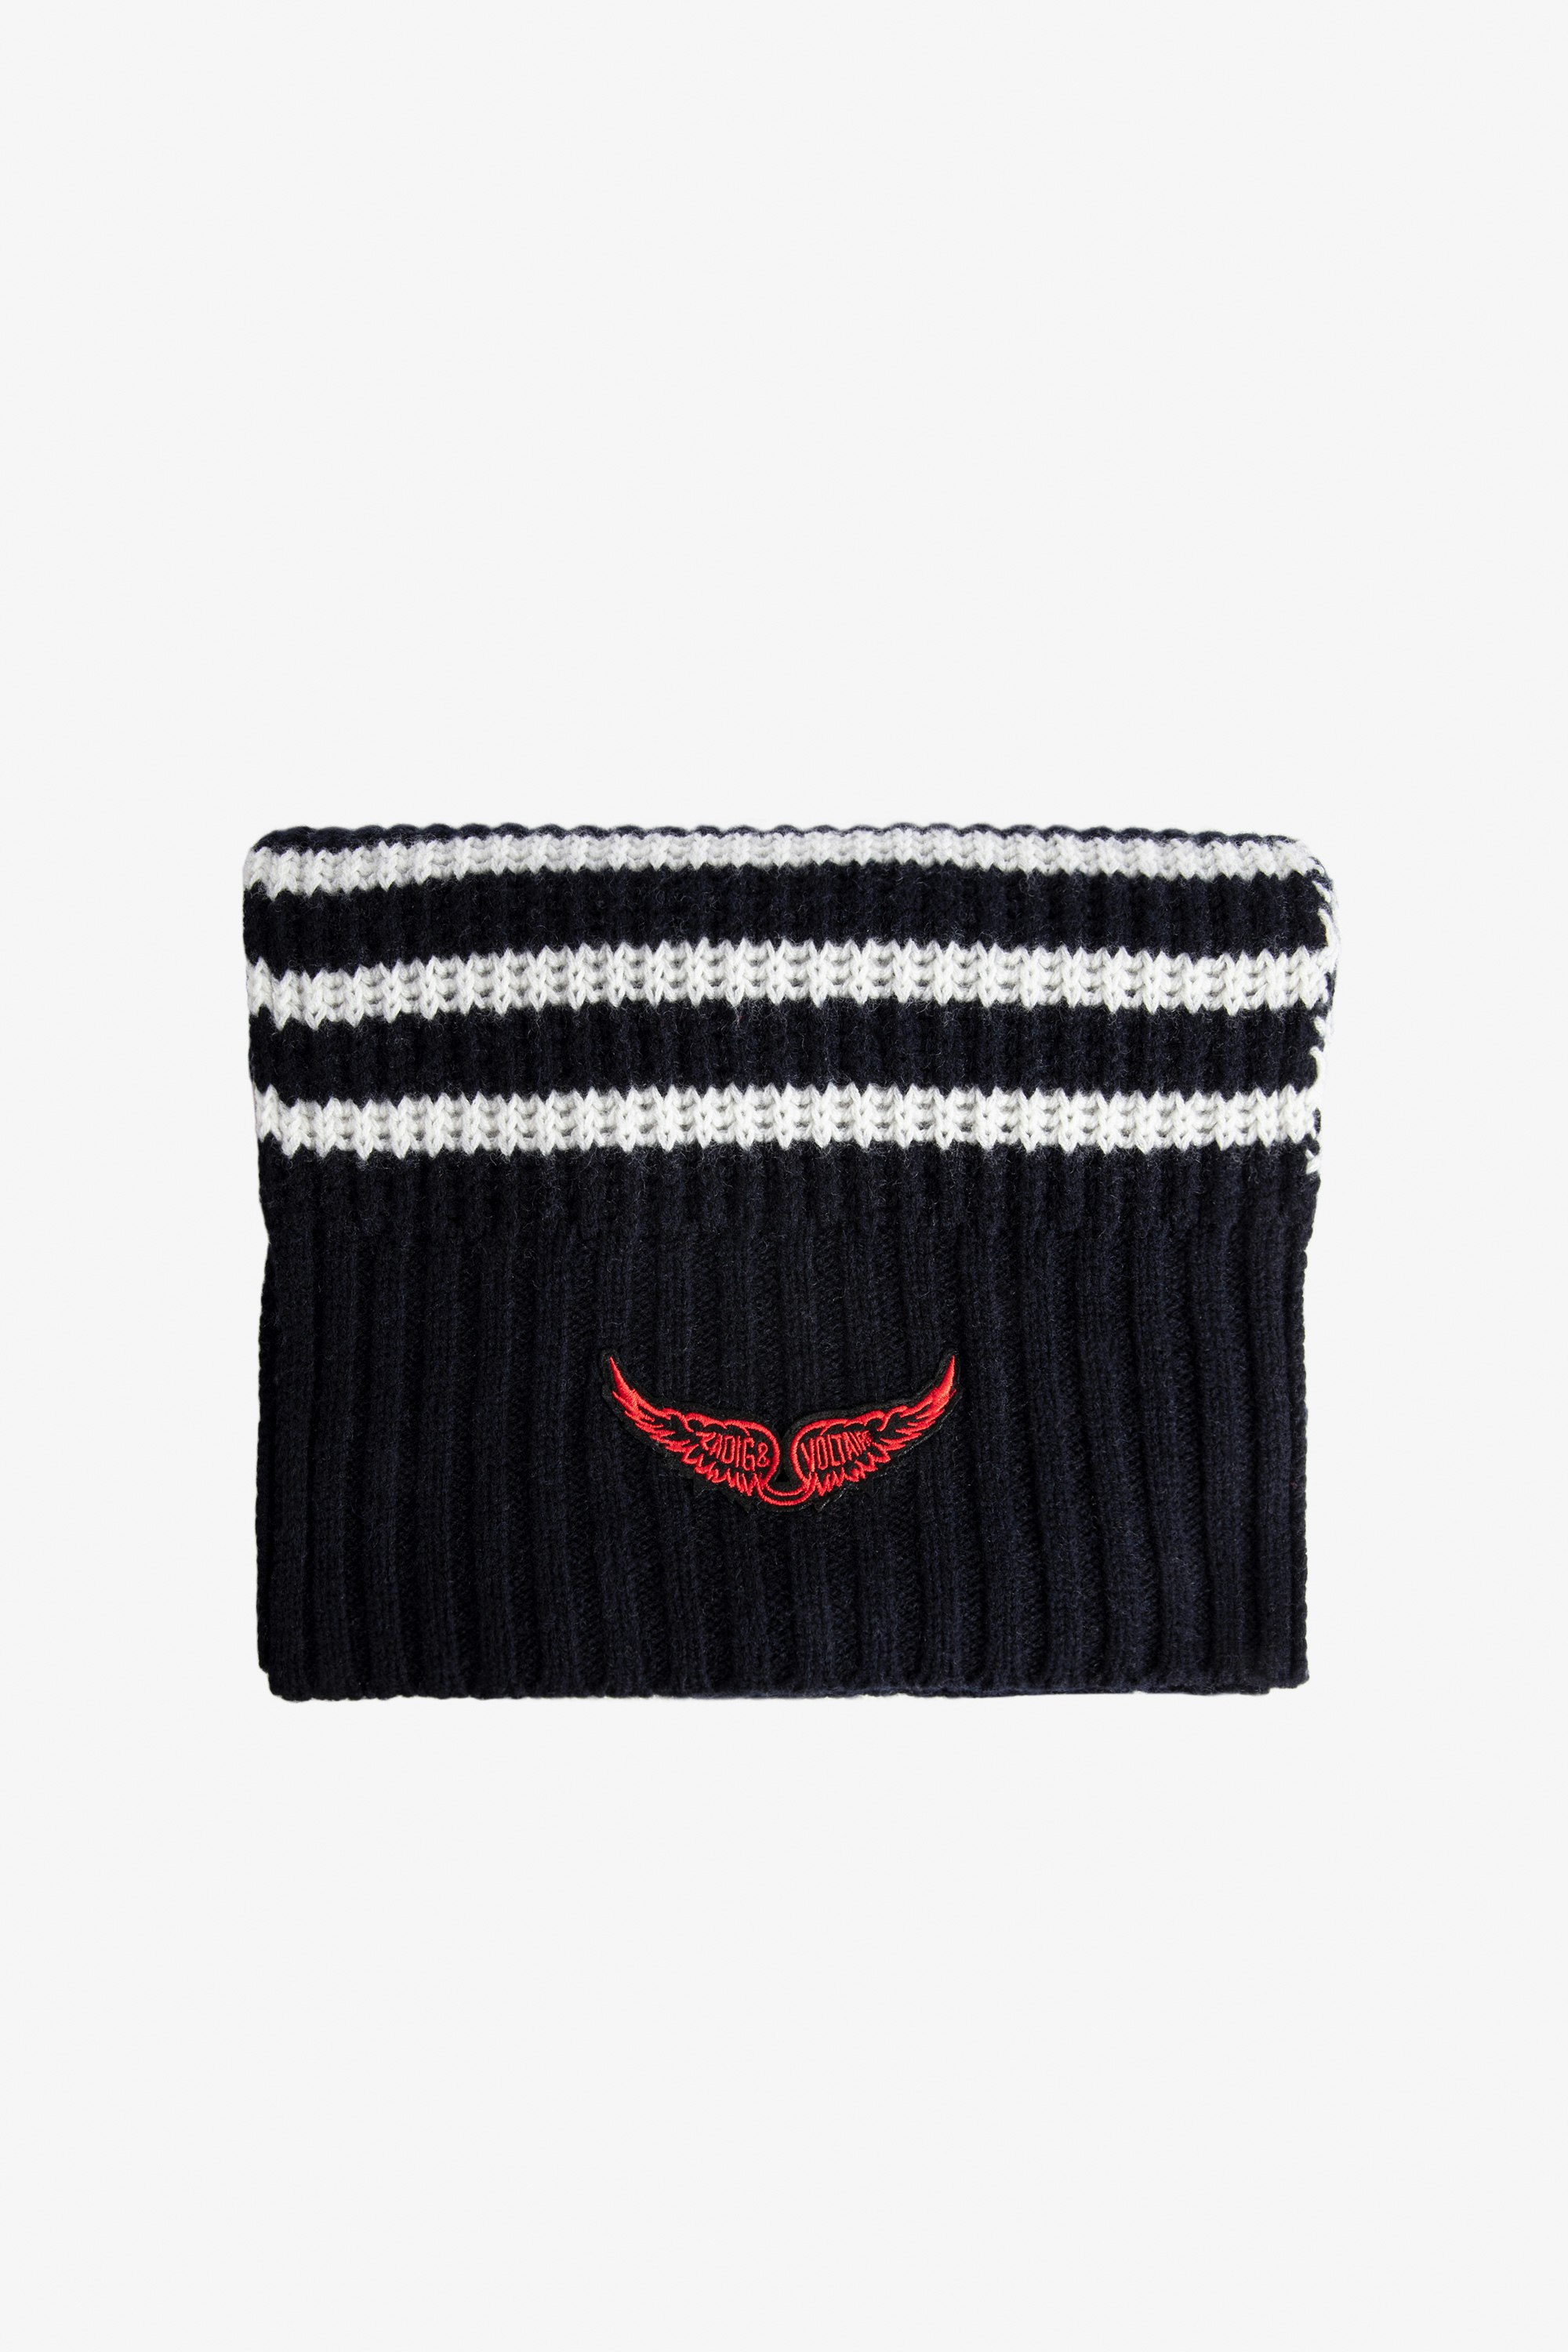 Ellane Girls’ Scarf Girls’ navy blue wool mix scarf with stripes and embroidered wings.